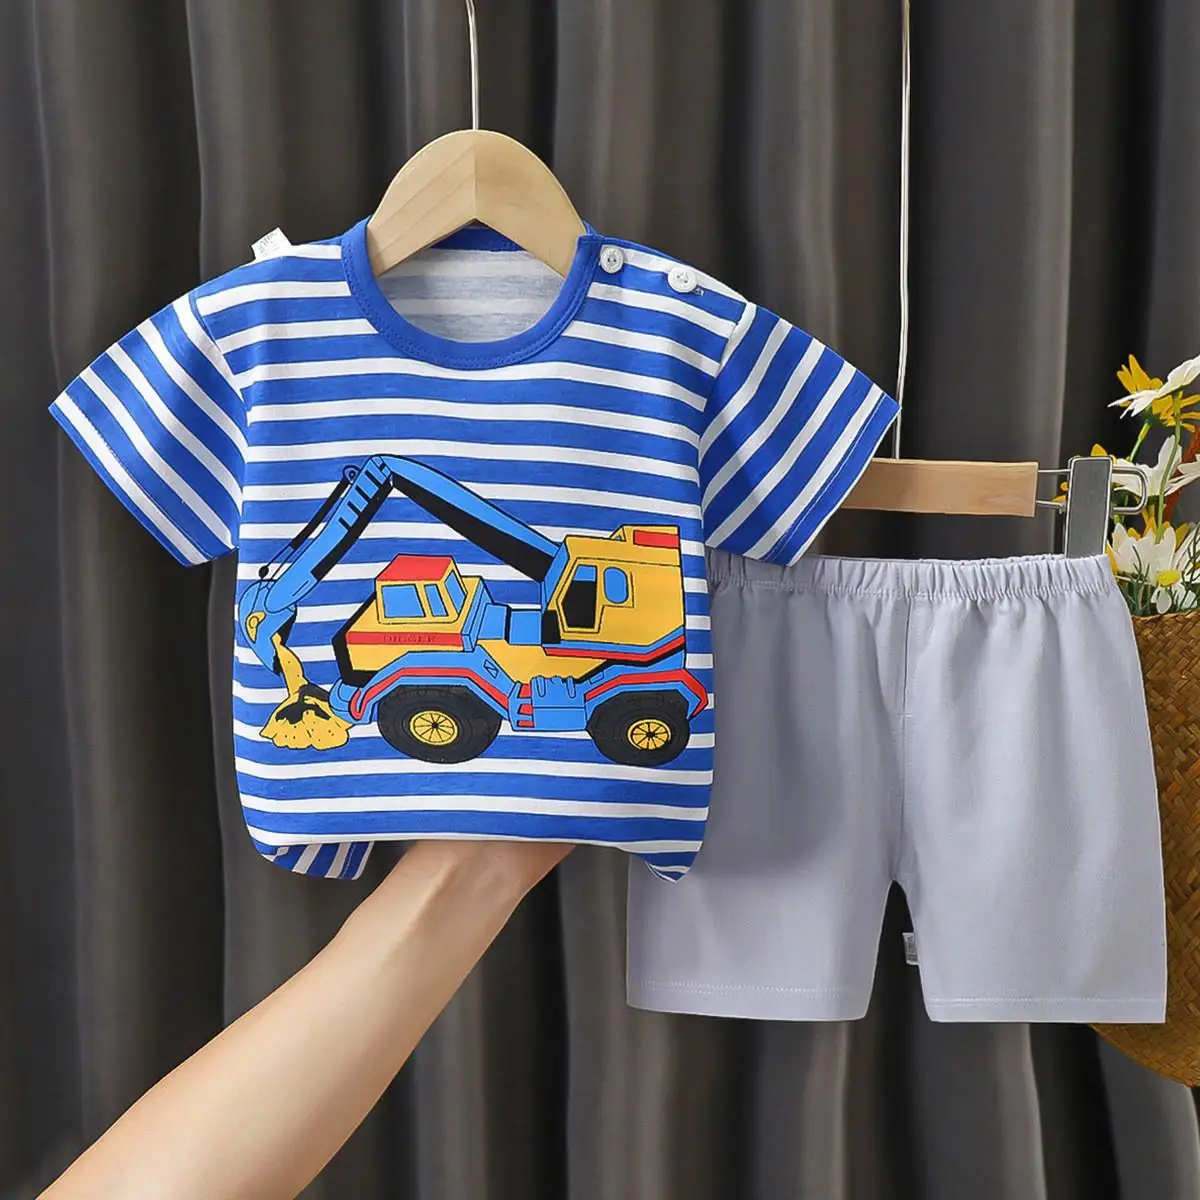 small baby clothing set	 Cotton Infant Boys Girls Clothes Summer Suit Baby Short Sleeve Shorts Sets Cute Cartoon Tshirt Toddler Kids Outfit 1 2 3 4 Years Baby Clothing Set classic Baby Clothing Set